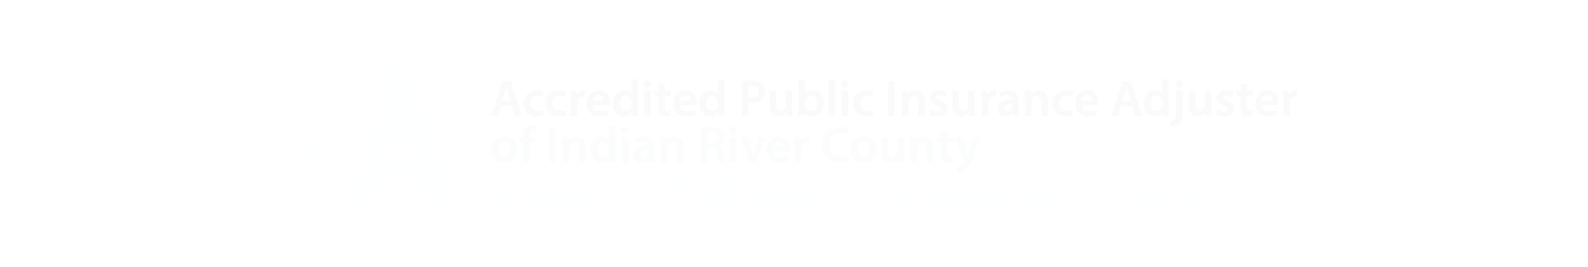 Accredited Public Insurance Adjuster of Indian River County  Logo